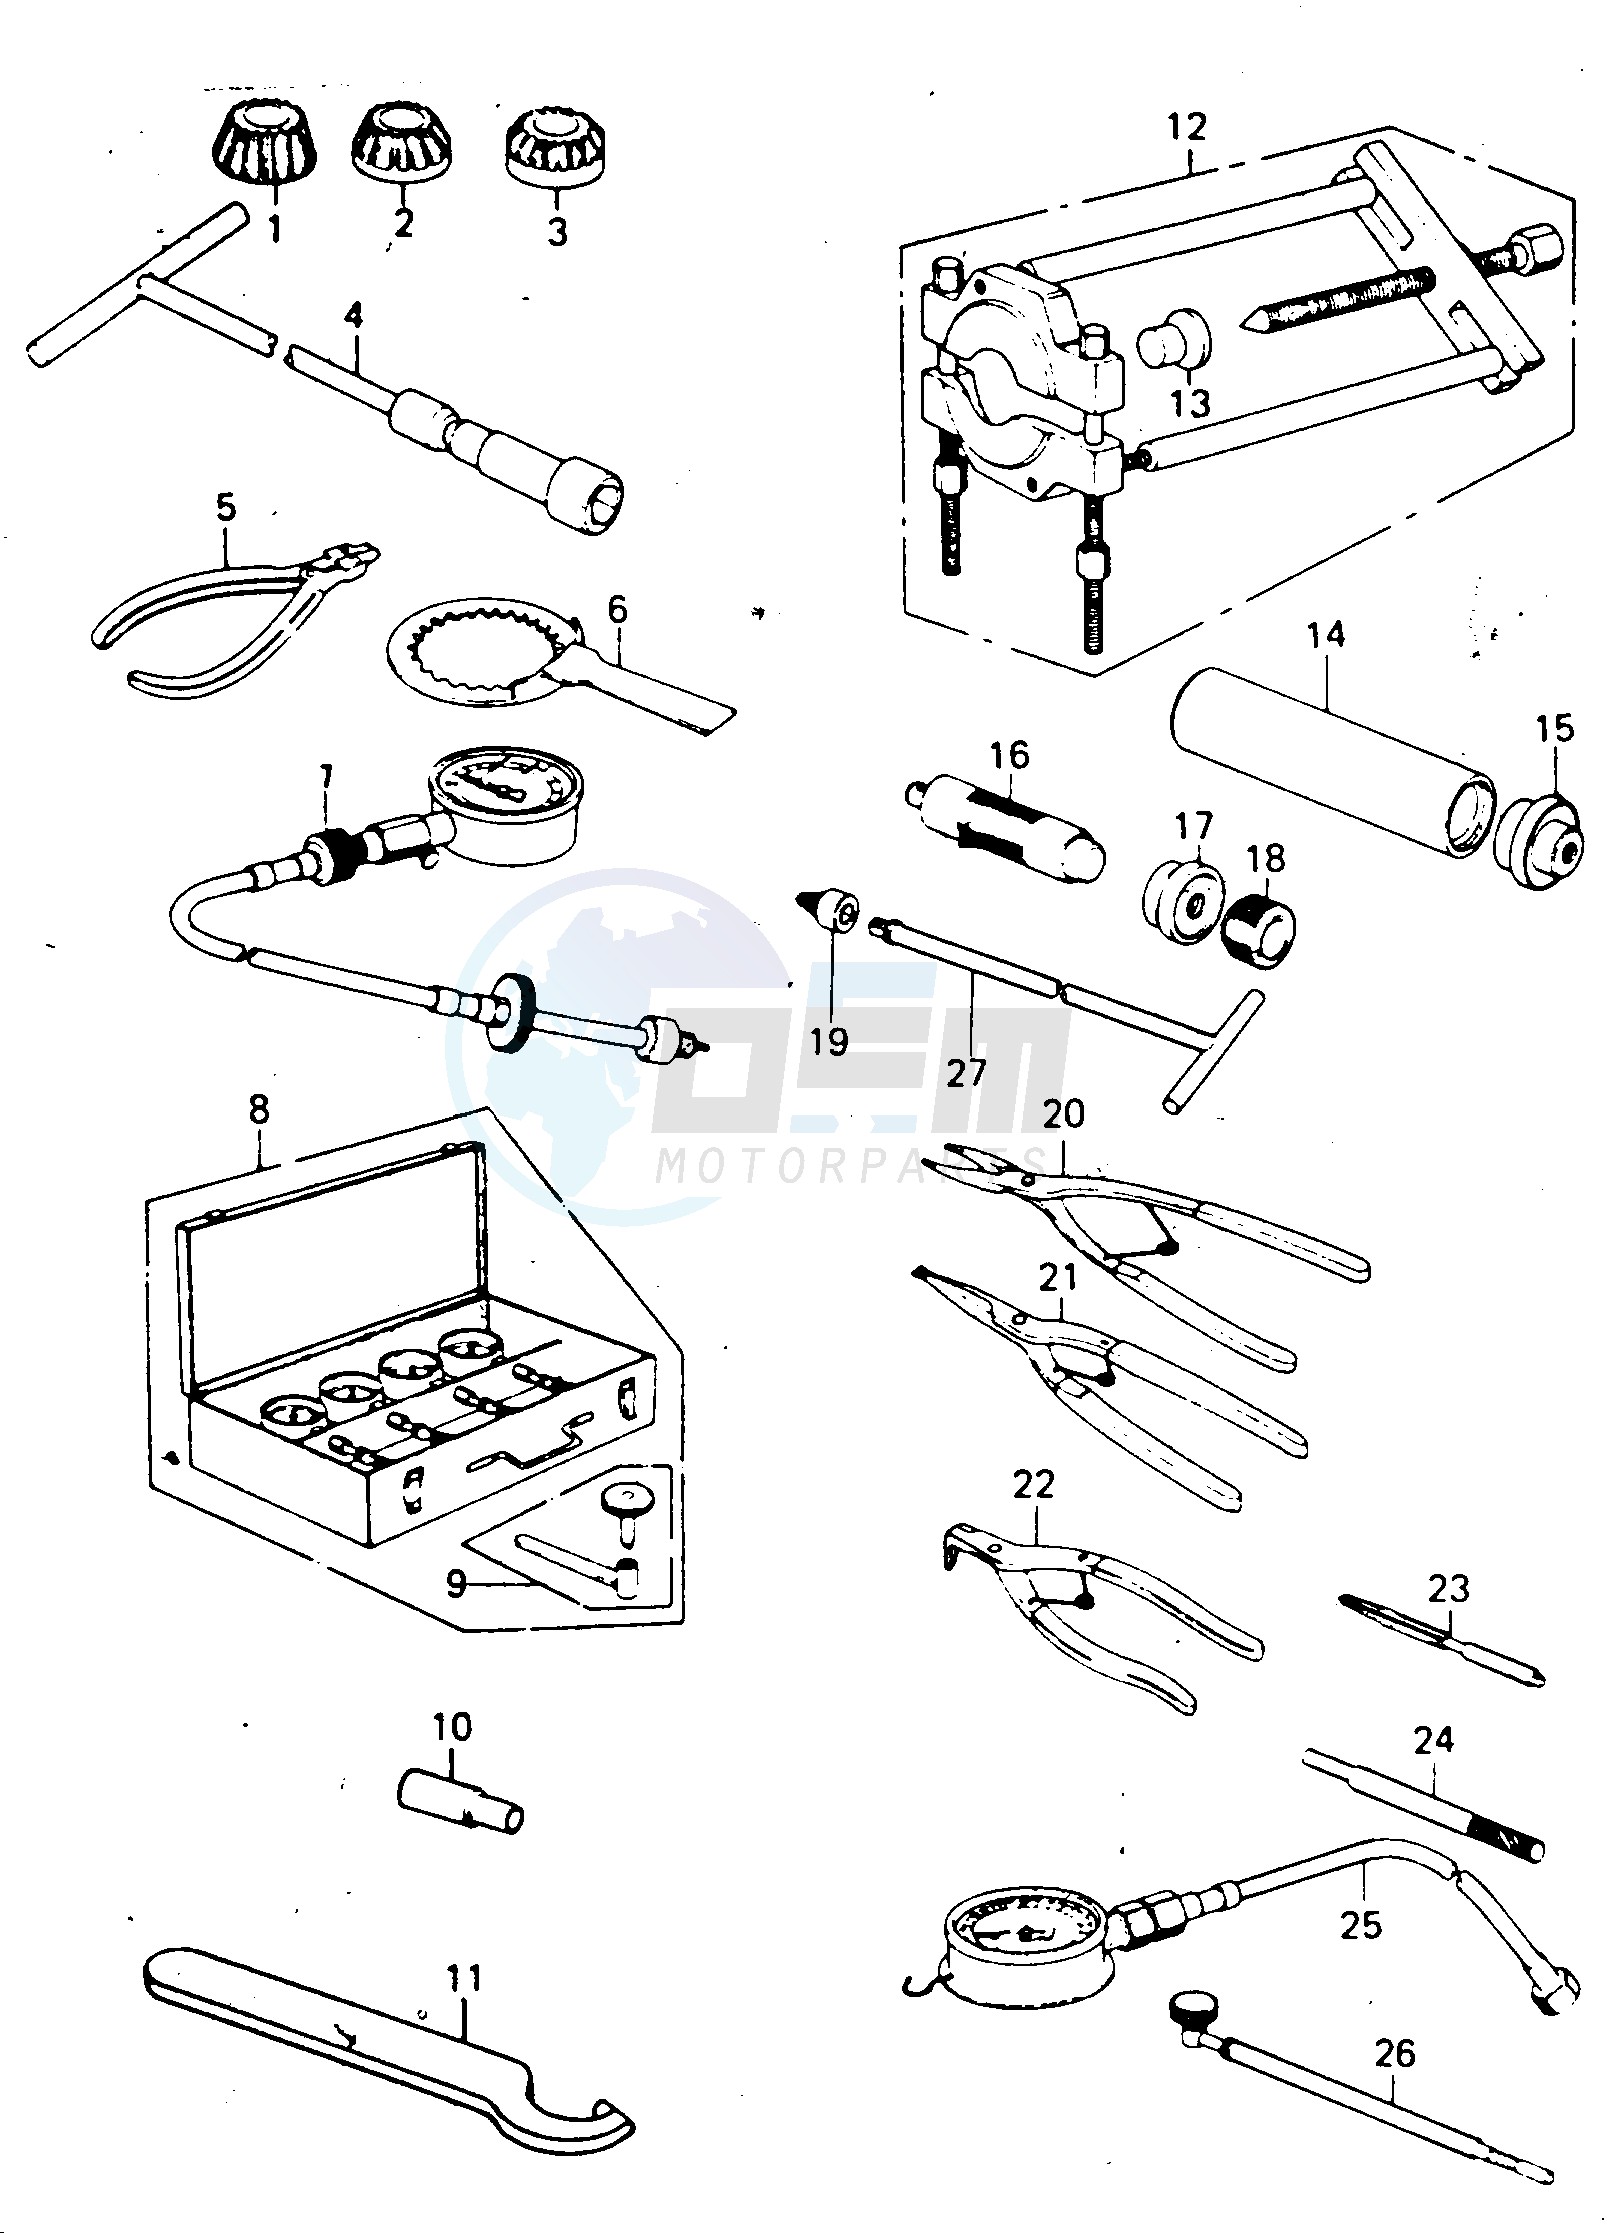 SPECIAL SERVICE TOOLS "A" image